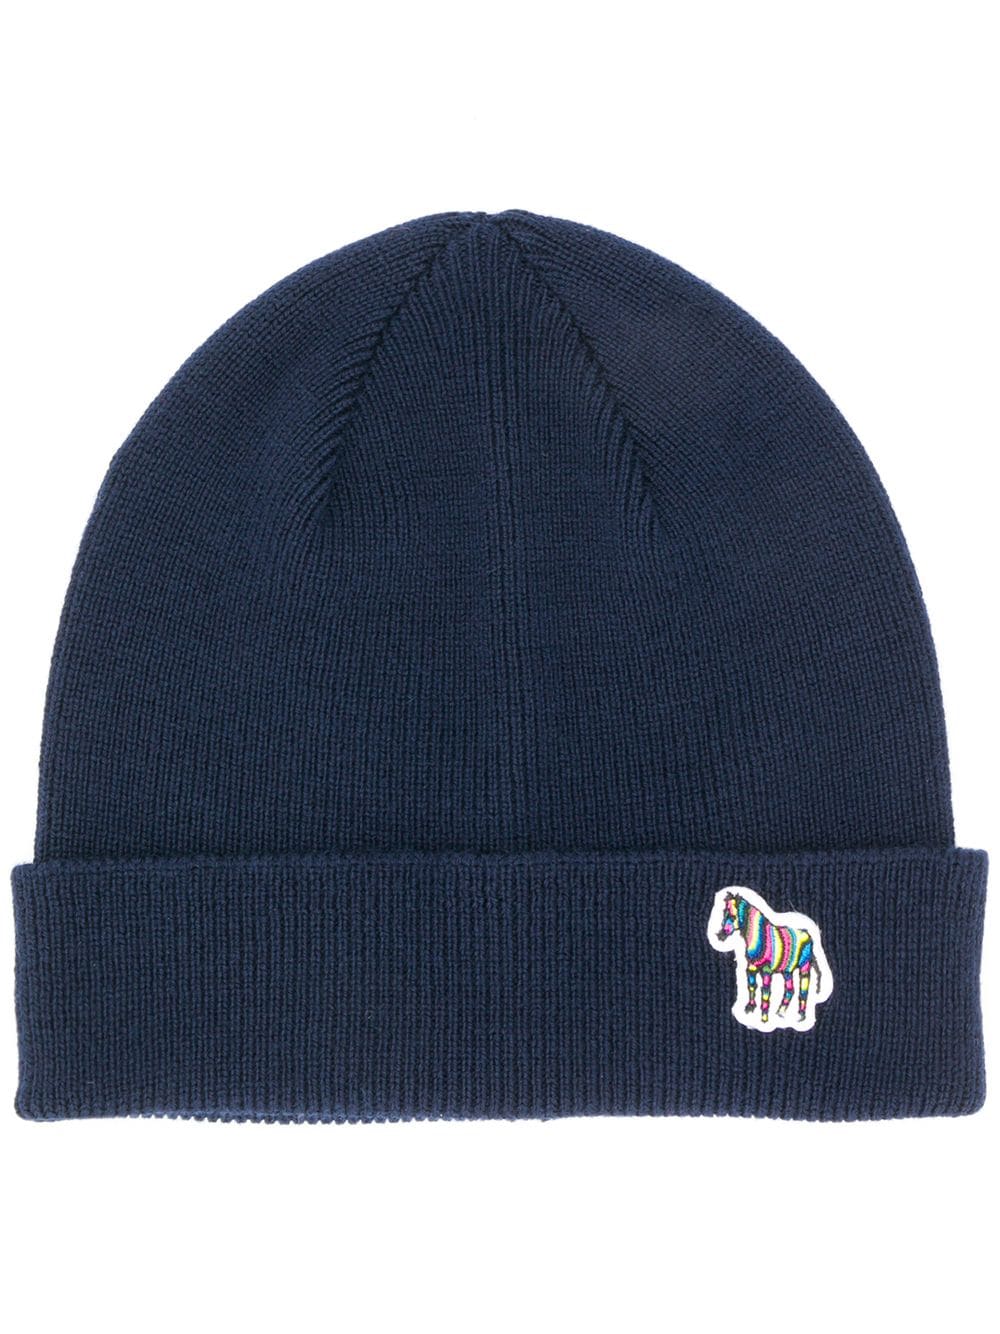 PS Paul Smith ribbed knit beanie - Blue von PS Paul Smith